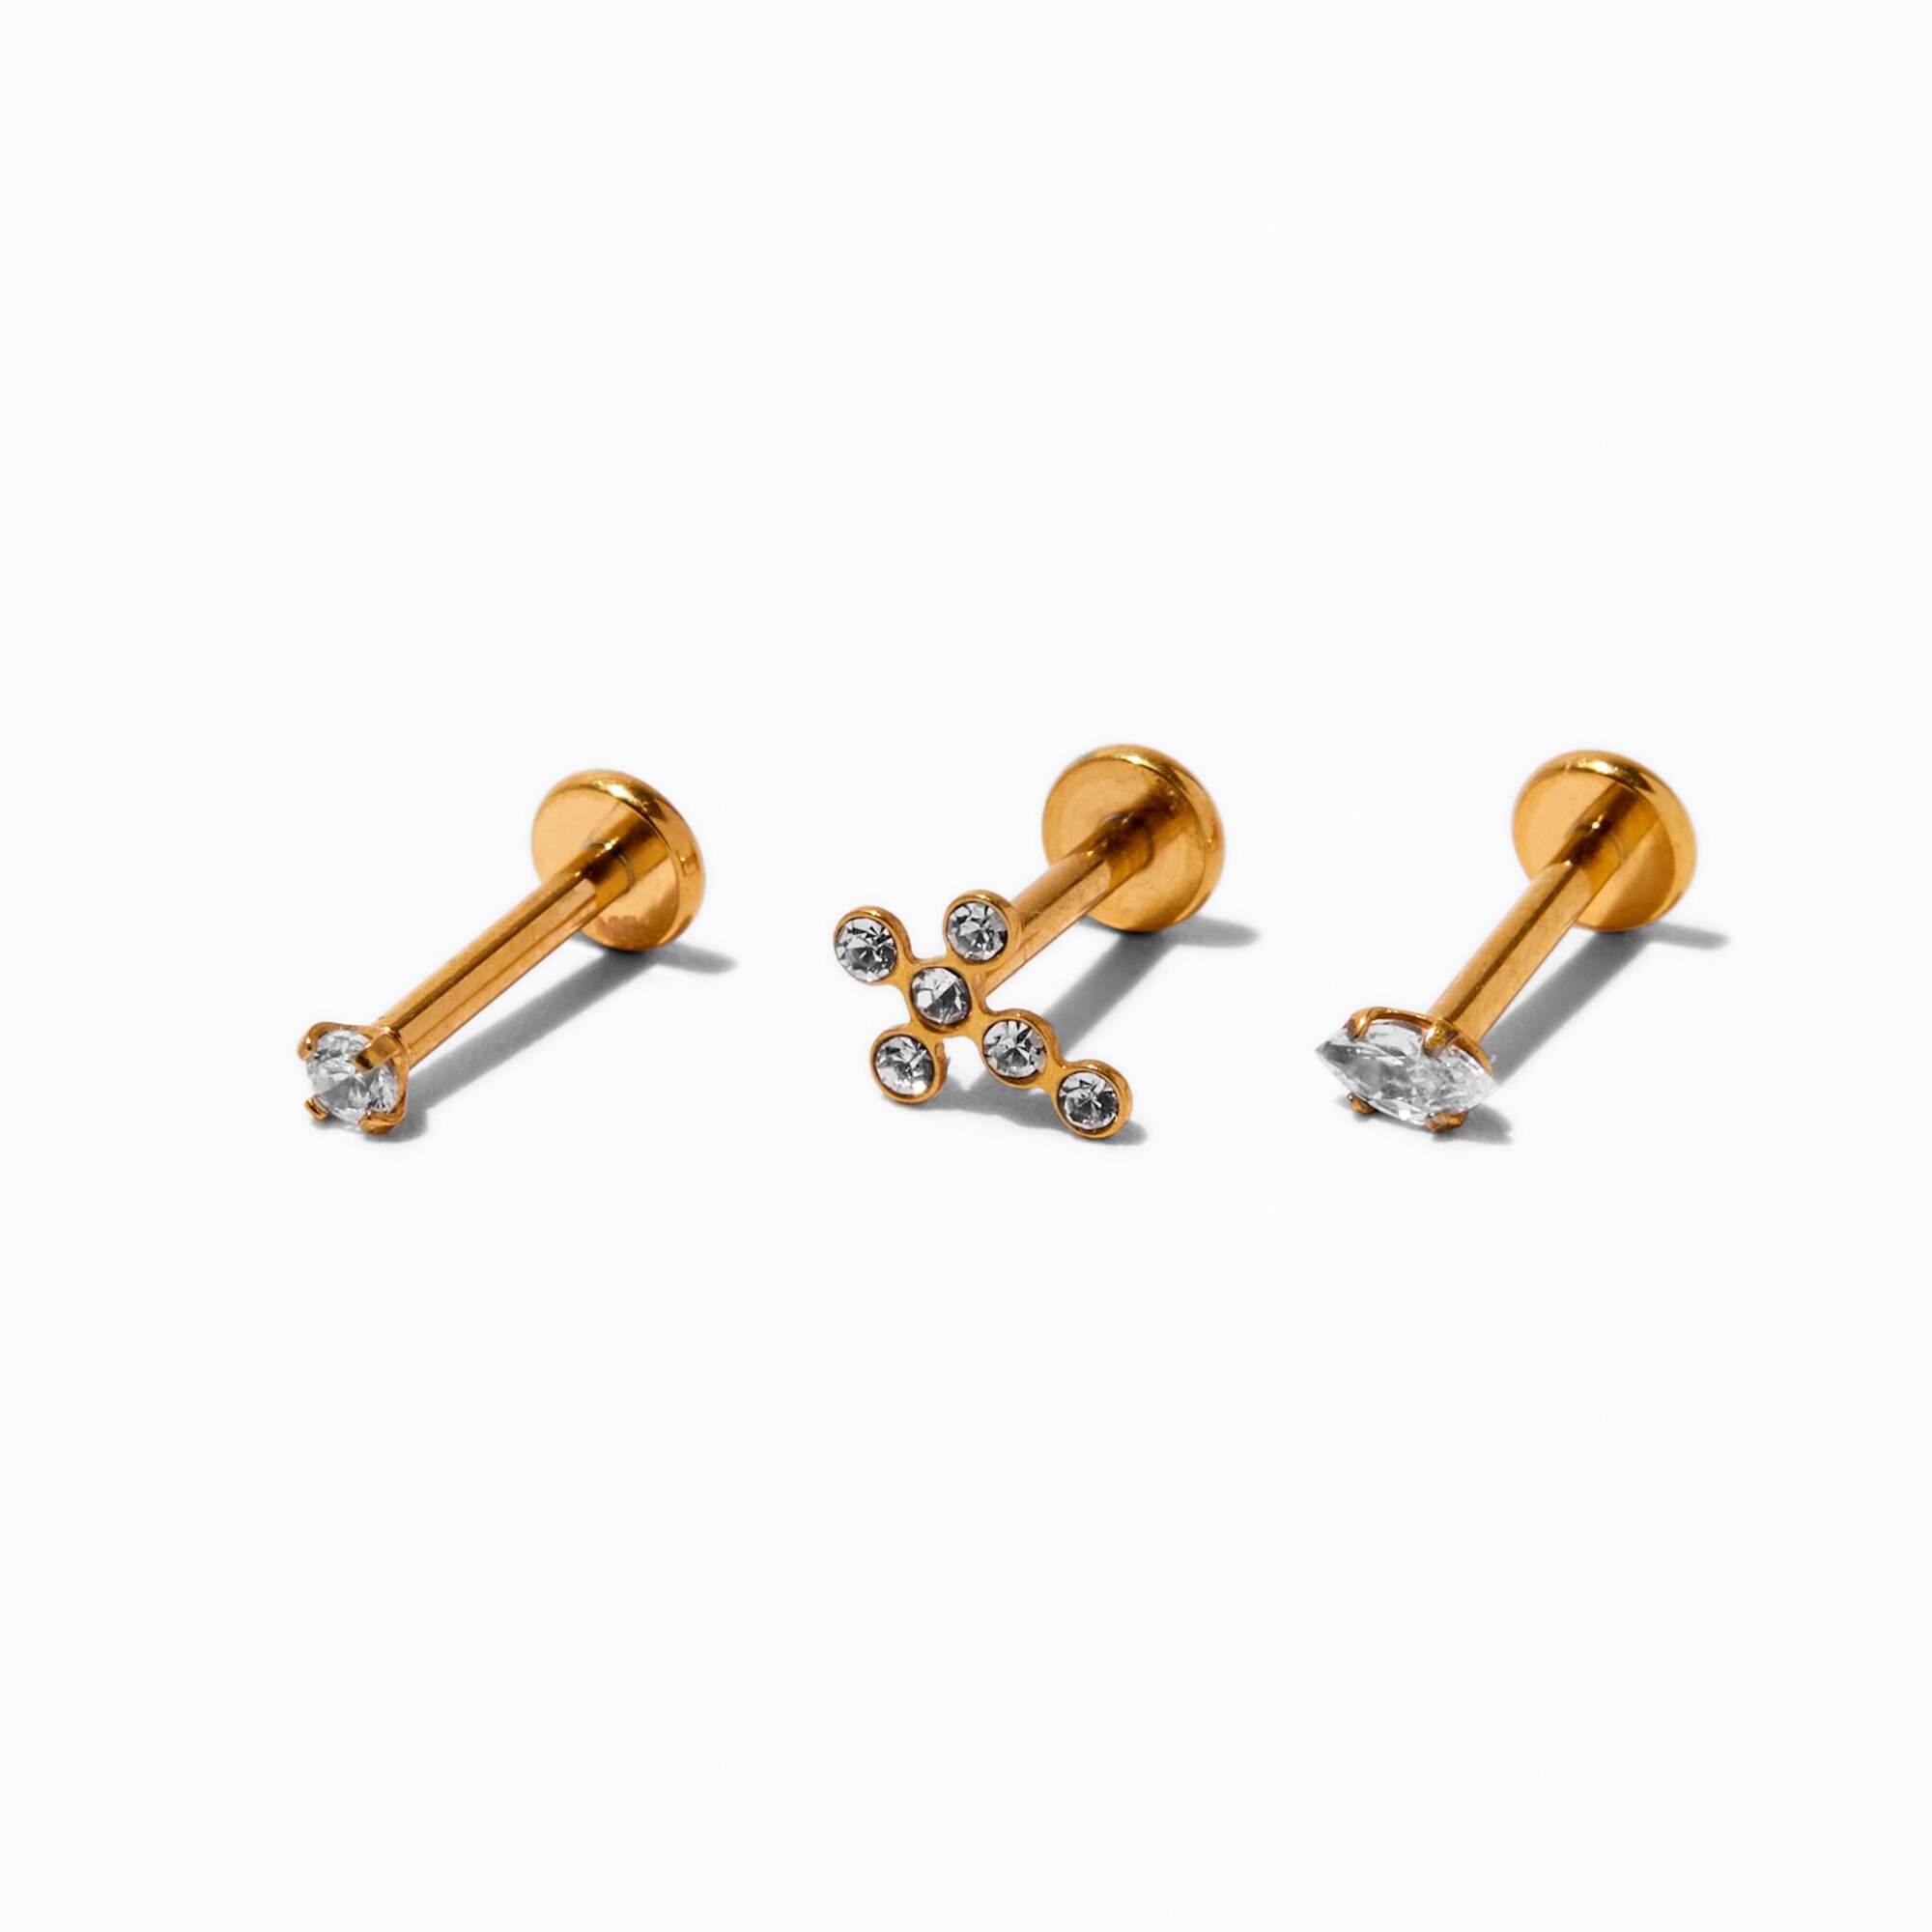 View Claires Tone Titanium 16G Cubic Zirconia Cross Cartilage Stud Earrings 3 Pack Gold information